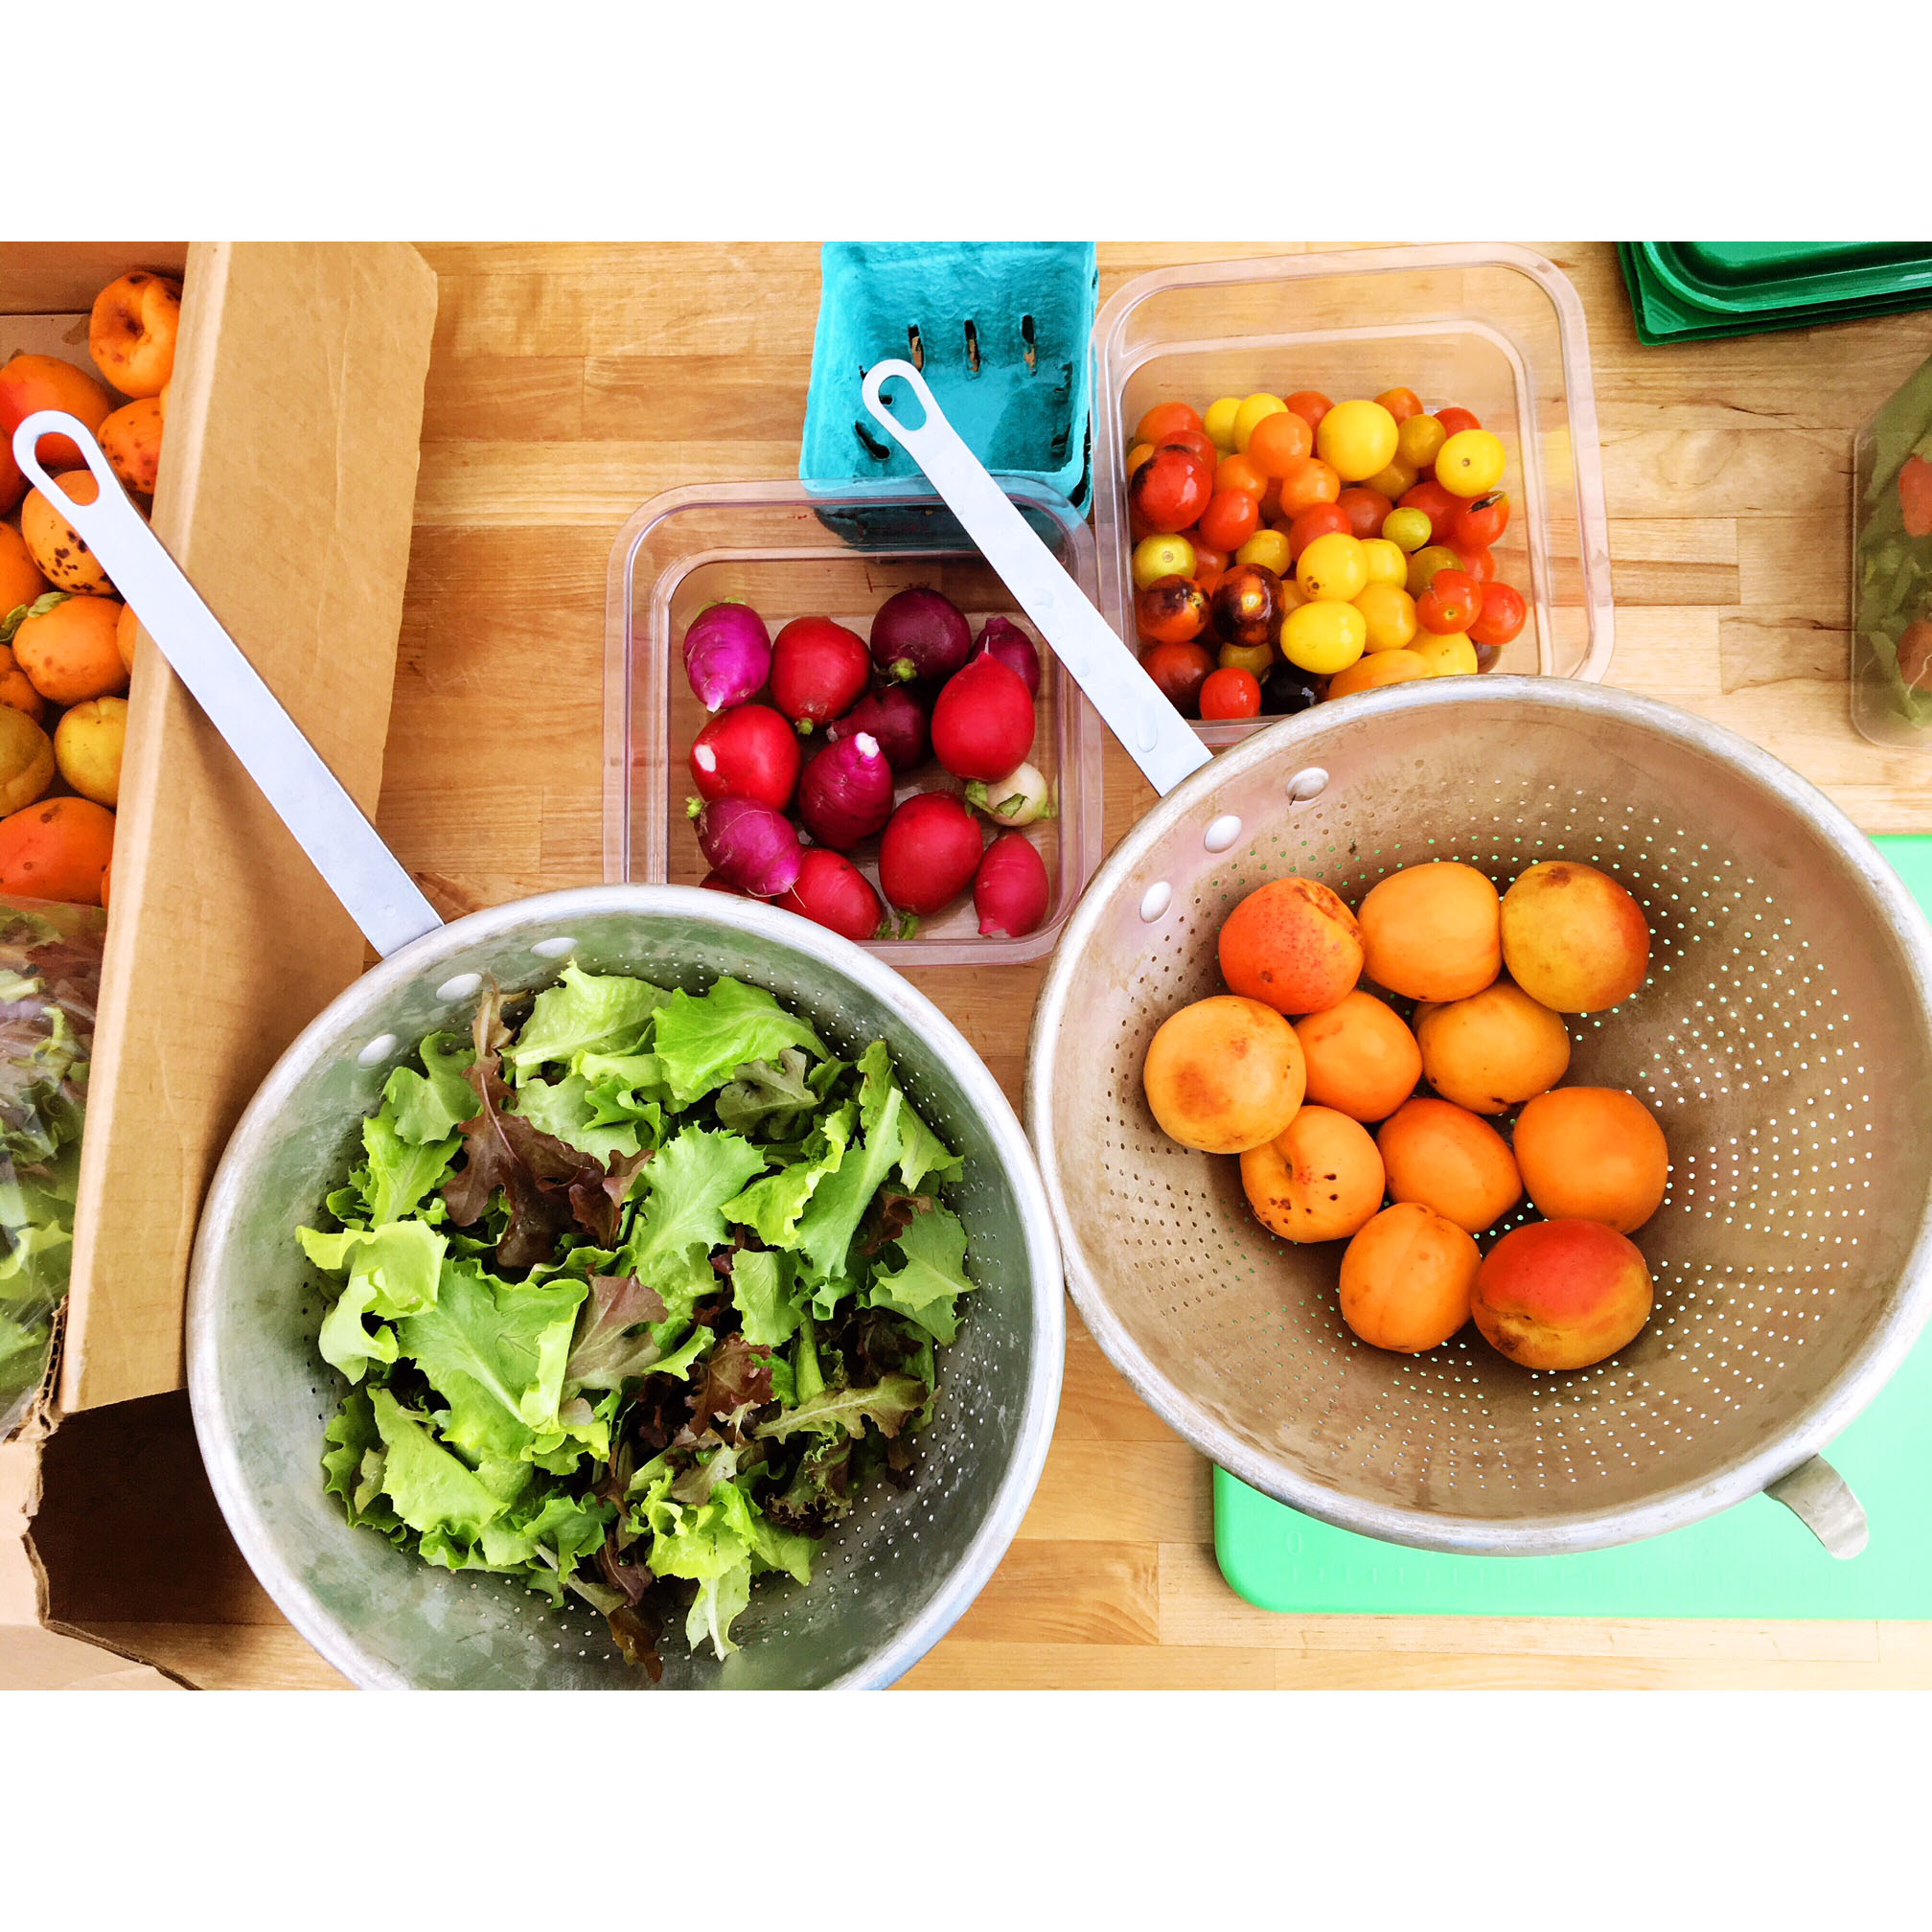 Colorful fruits and vegetables in containers on a countertop.